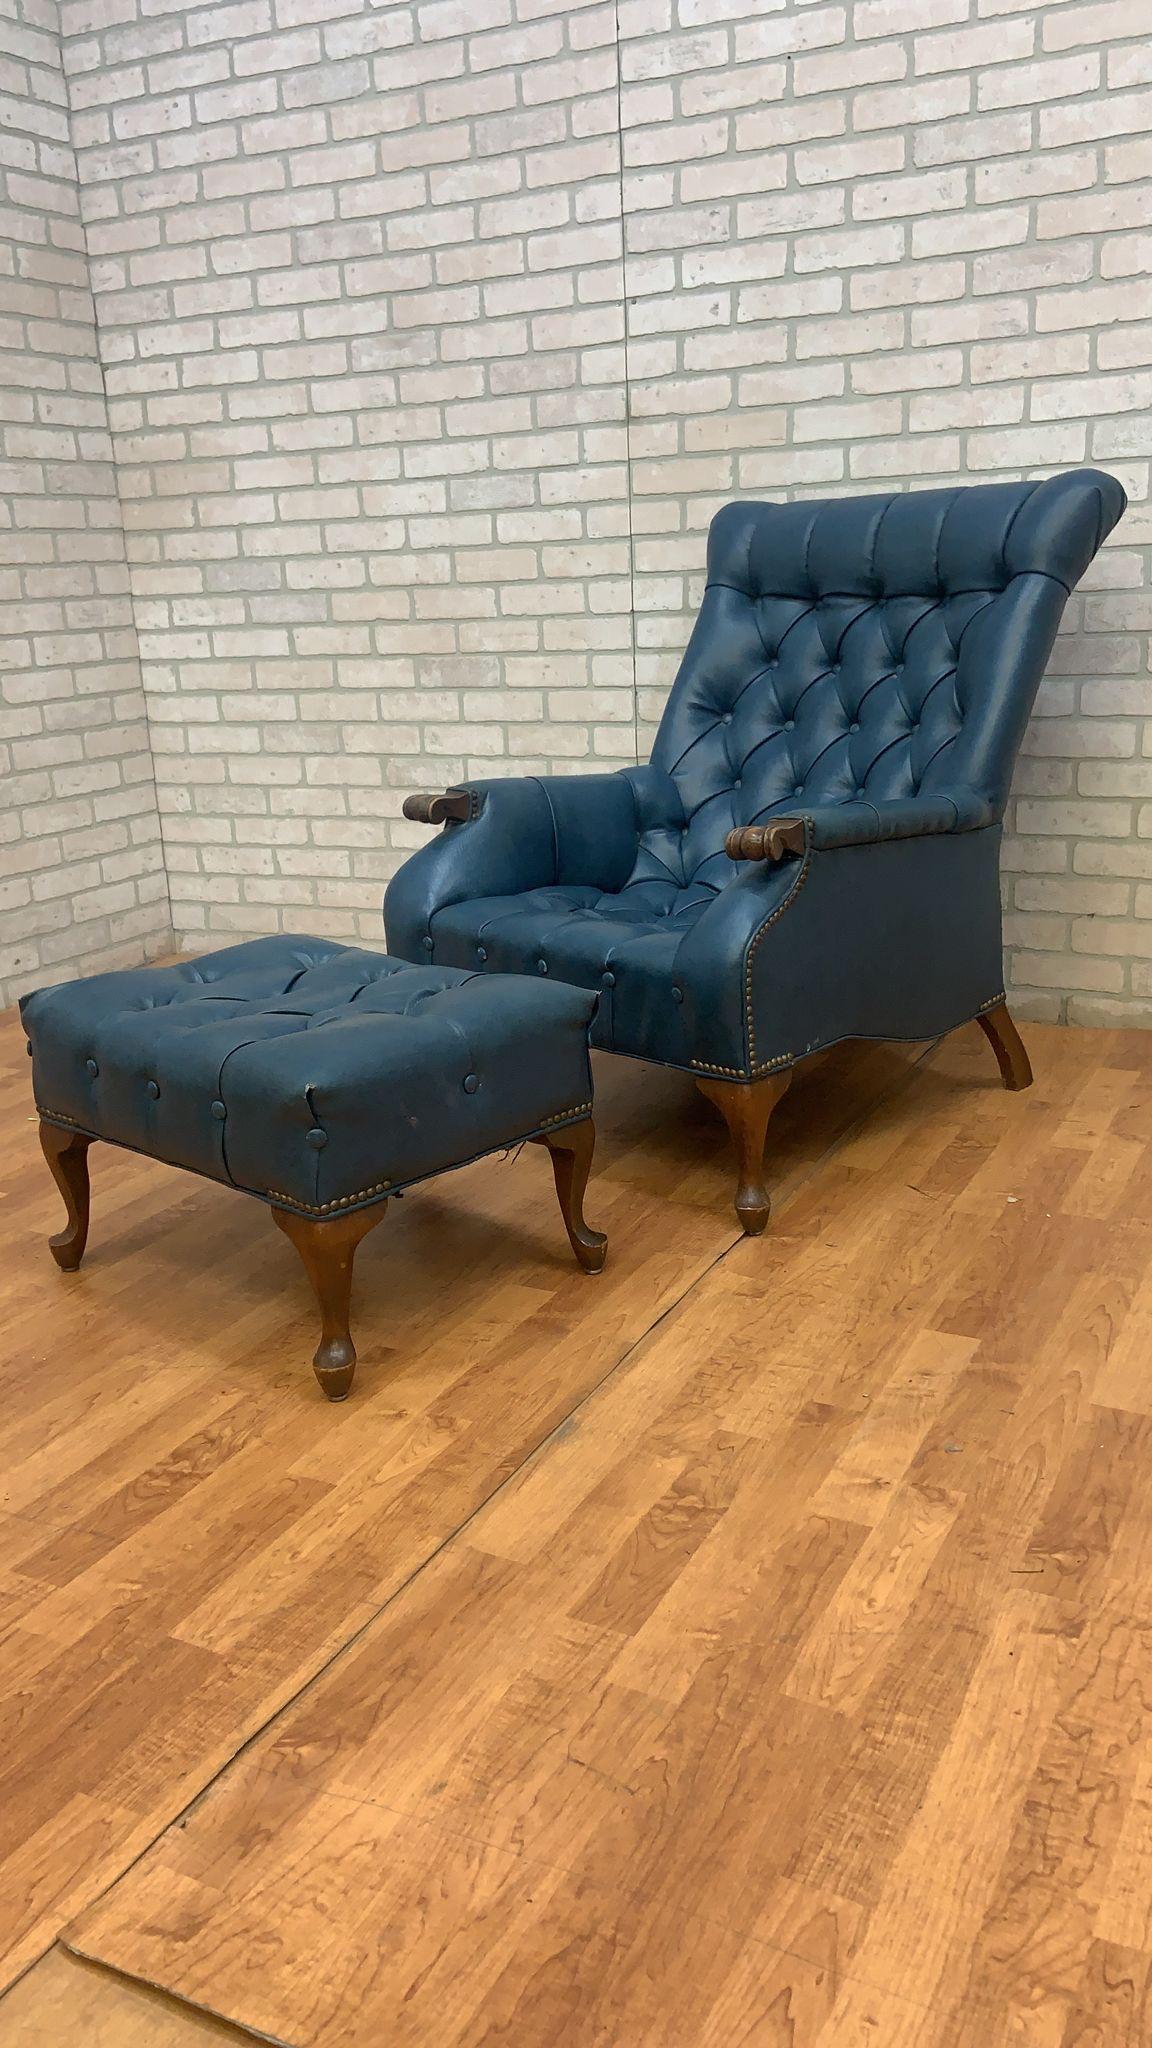 Wood Vintage Sleepy Hollow Blue Tufted Chair and Ottoman - 2 Piece Set